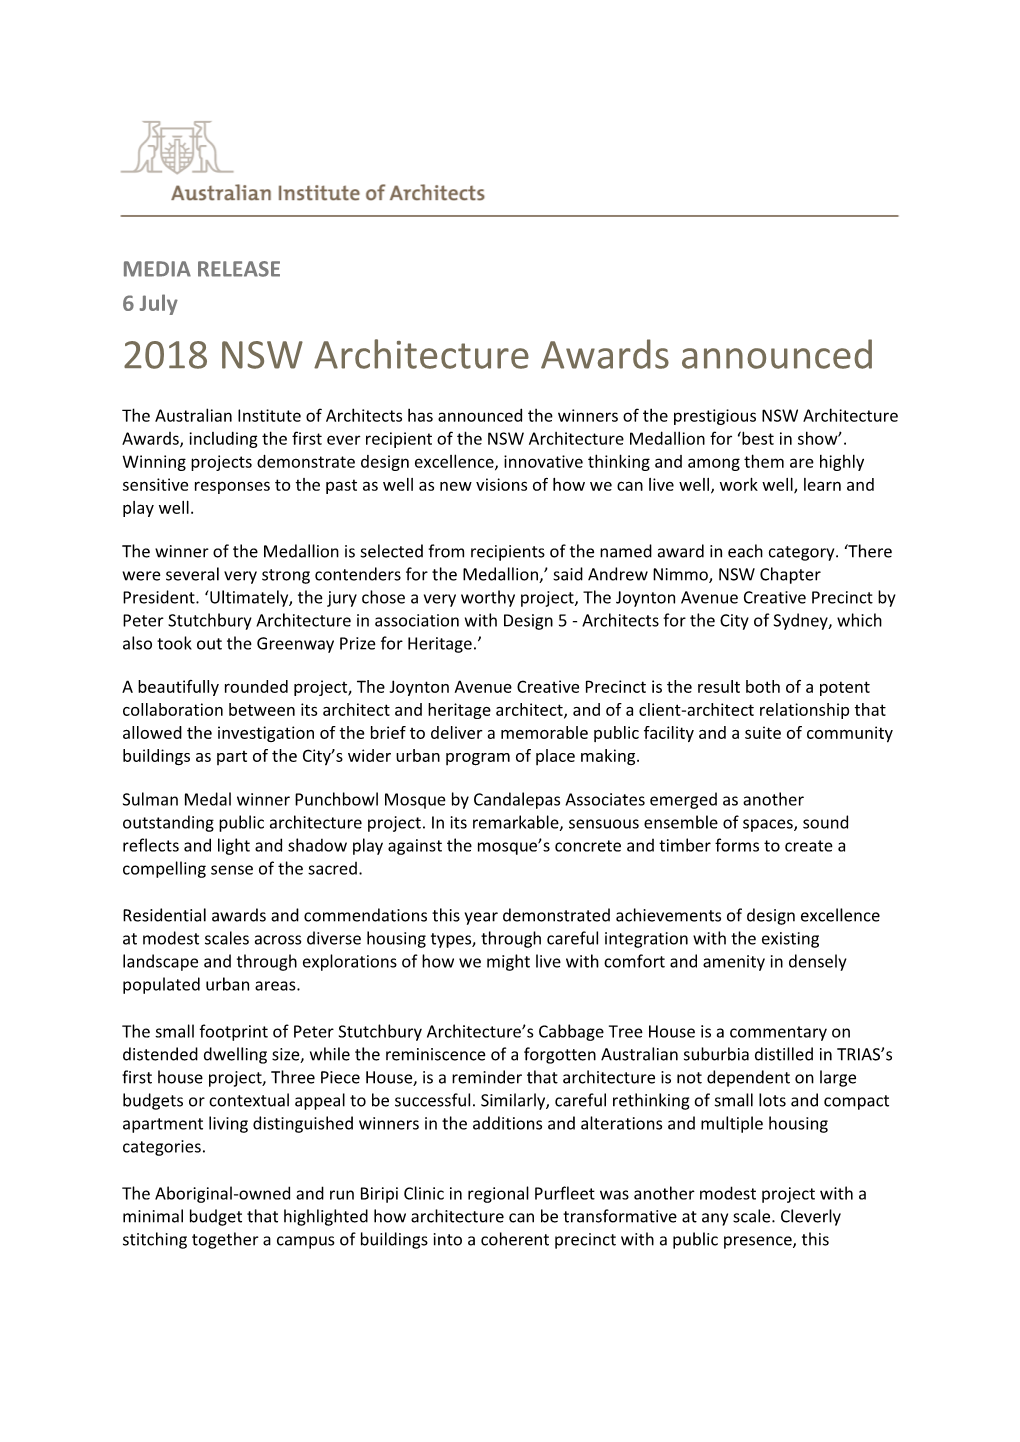 2018 NSW Architecture Awards Announced